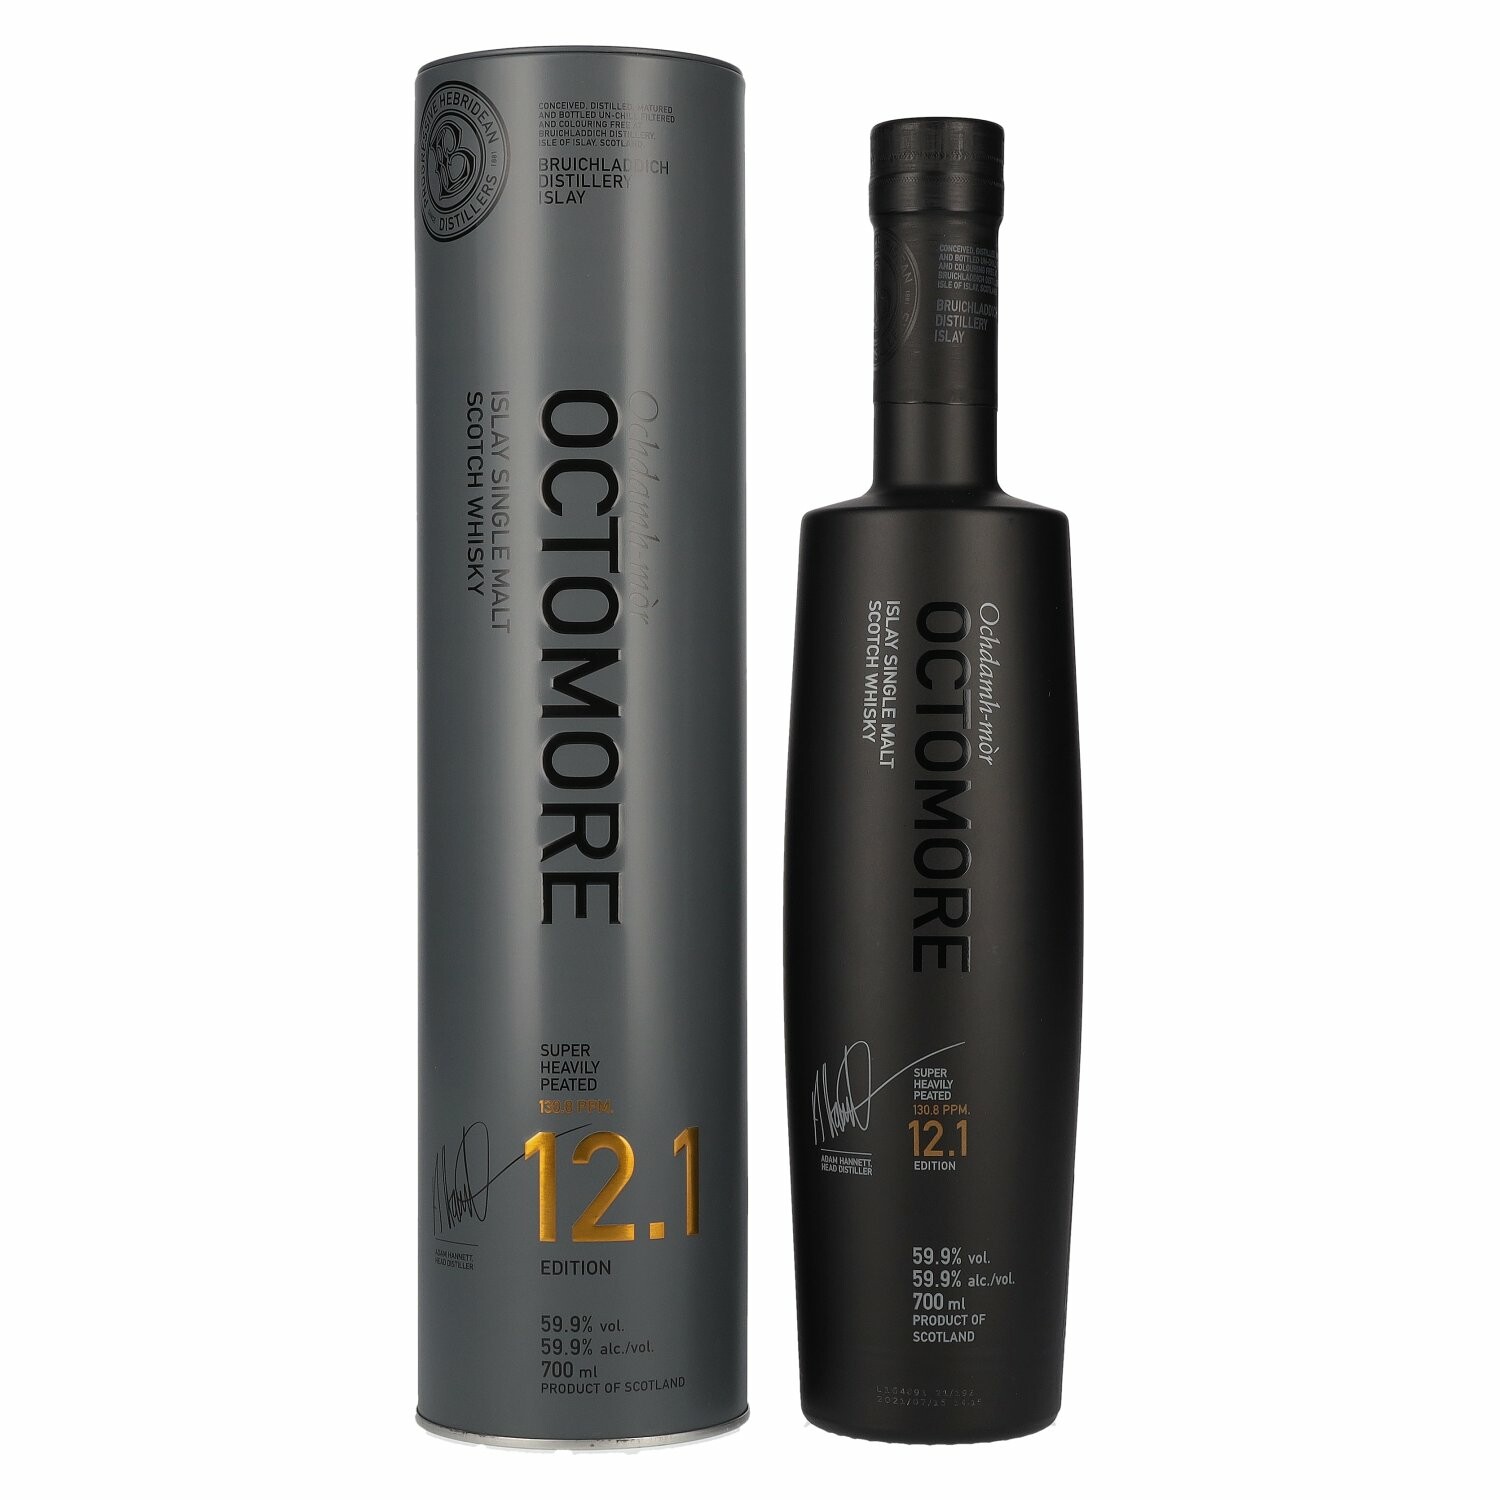 Octomore EDITION: 12.1 Super-Heavily Peated 2016 59,9% Vol. 0,7l in Tinbox